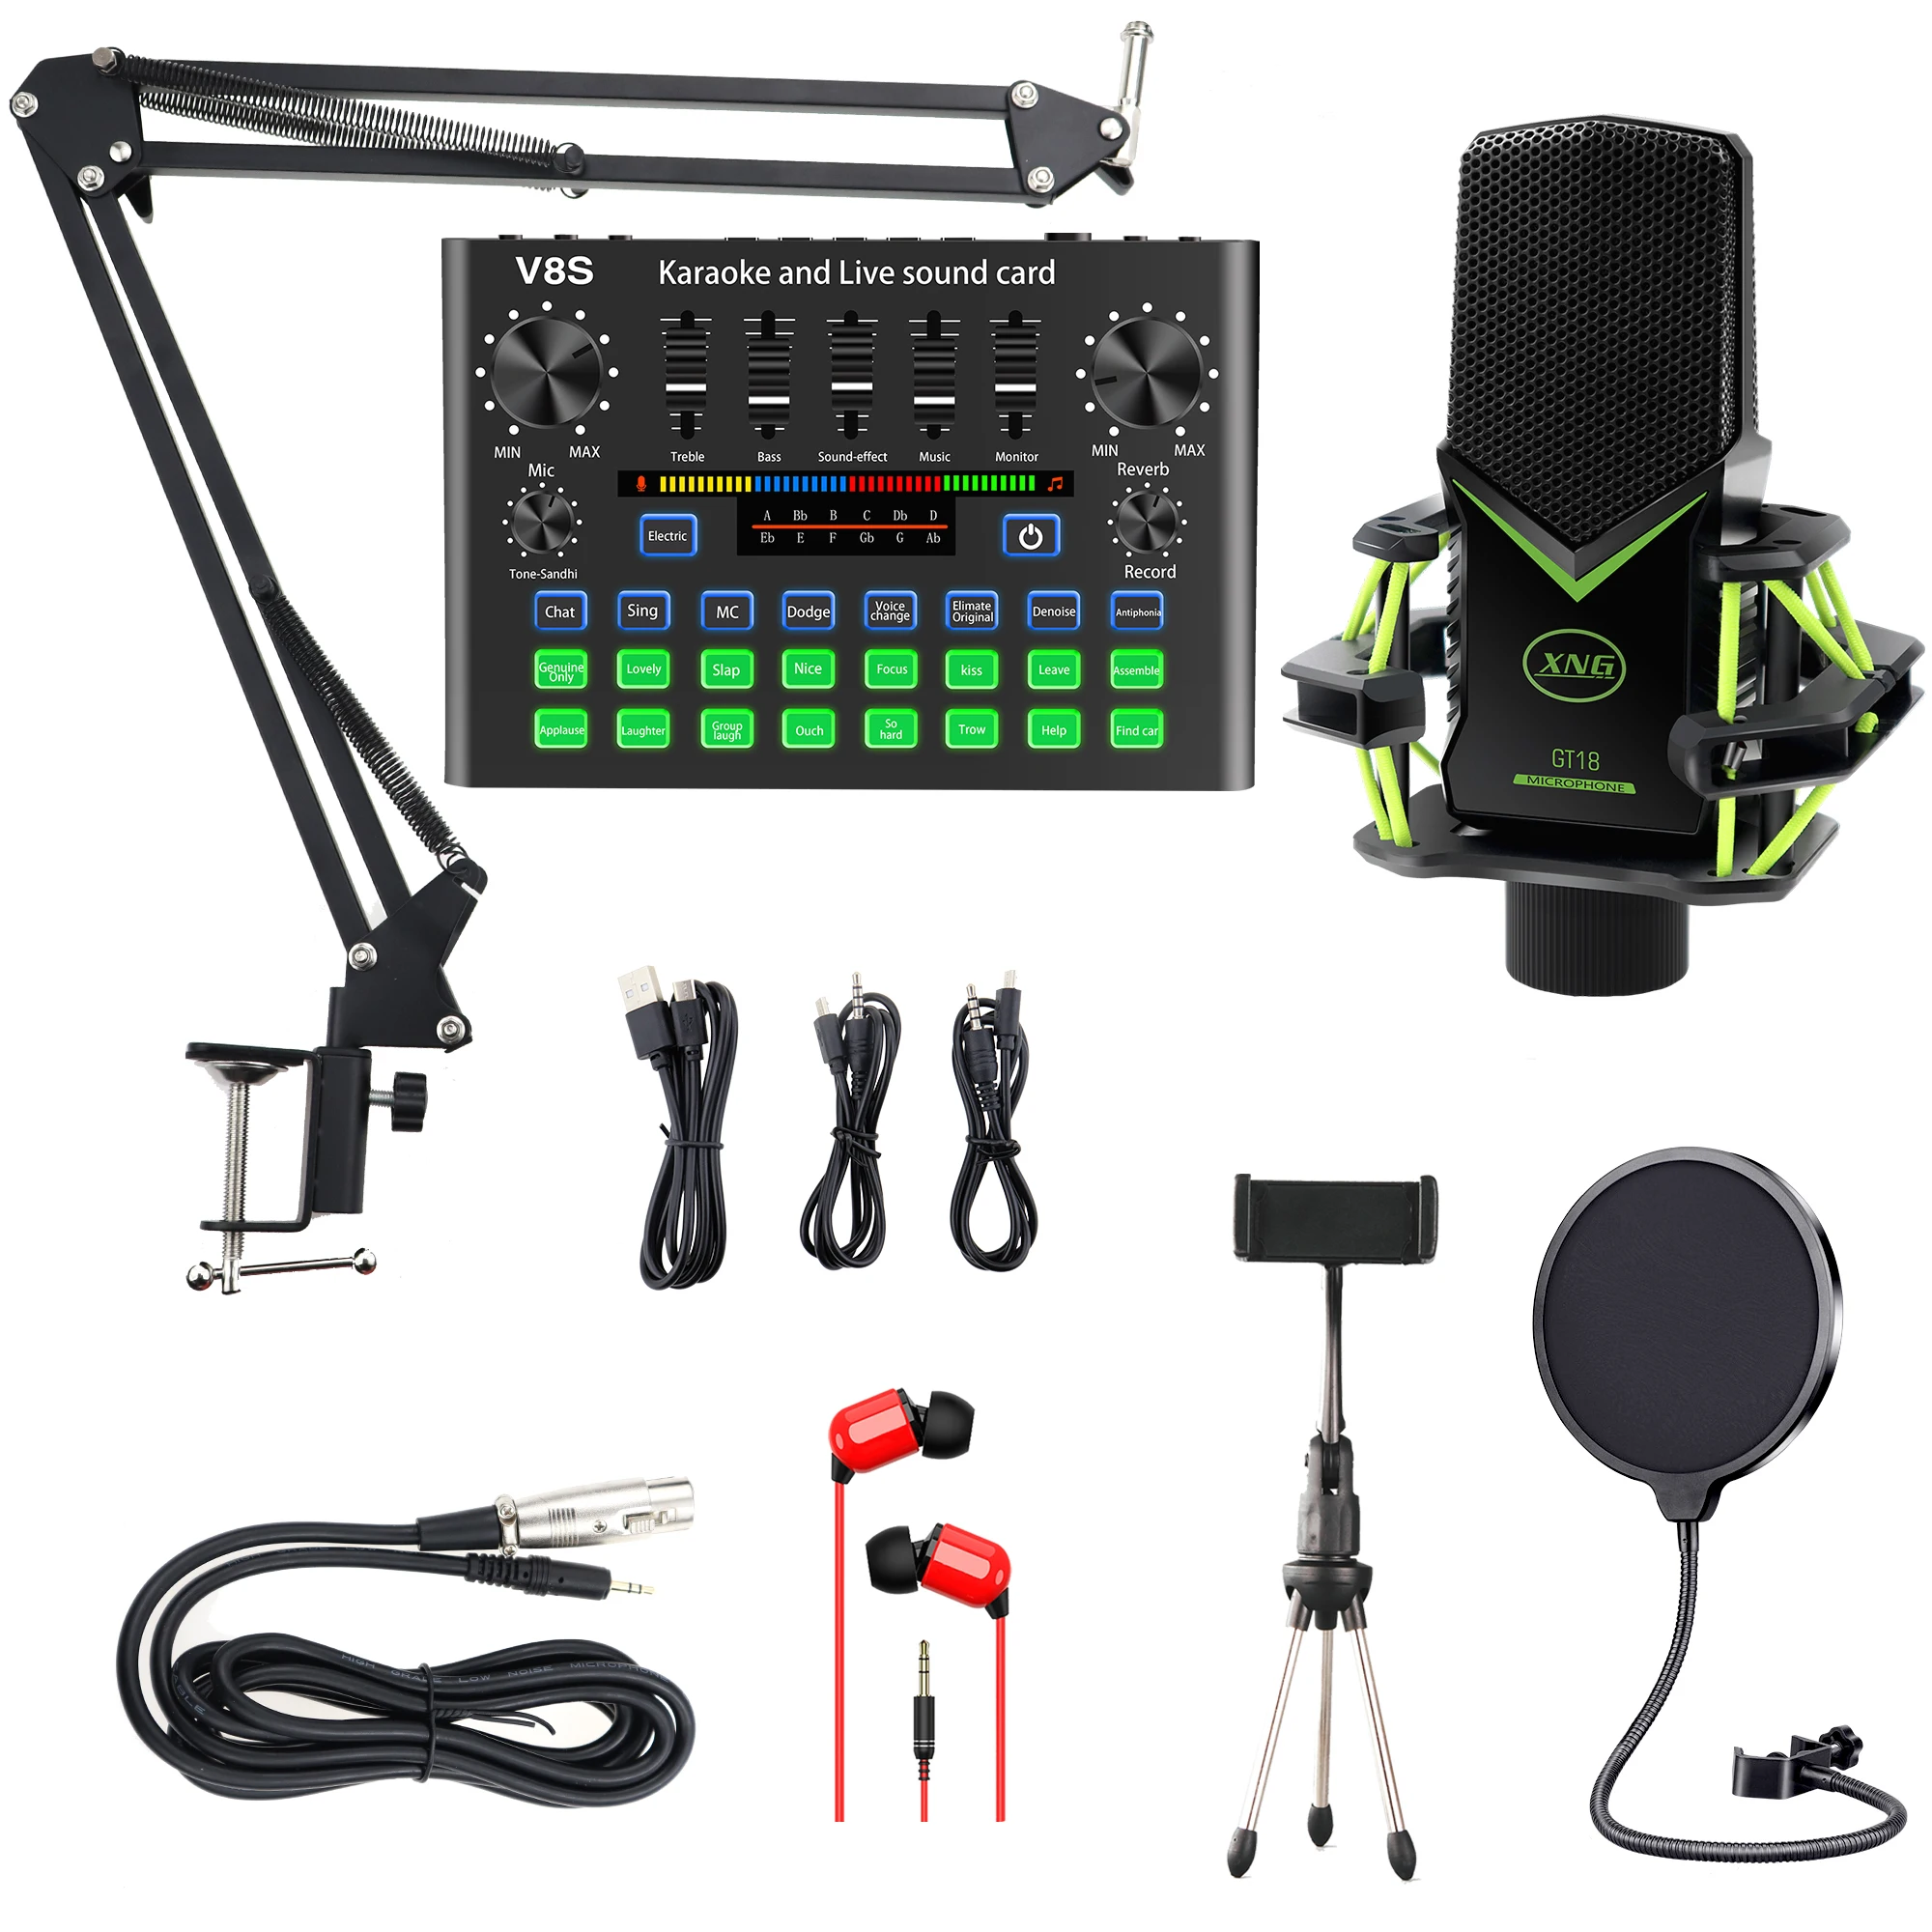 Wholesale V15 sound card and GT18 MICR microphone professional live stream studio kit From m.alibaba